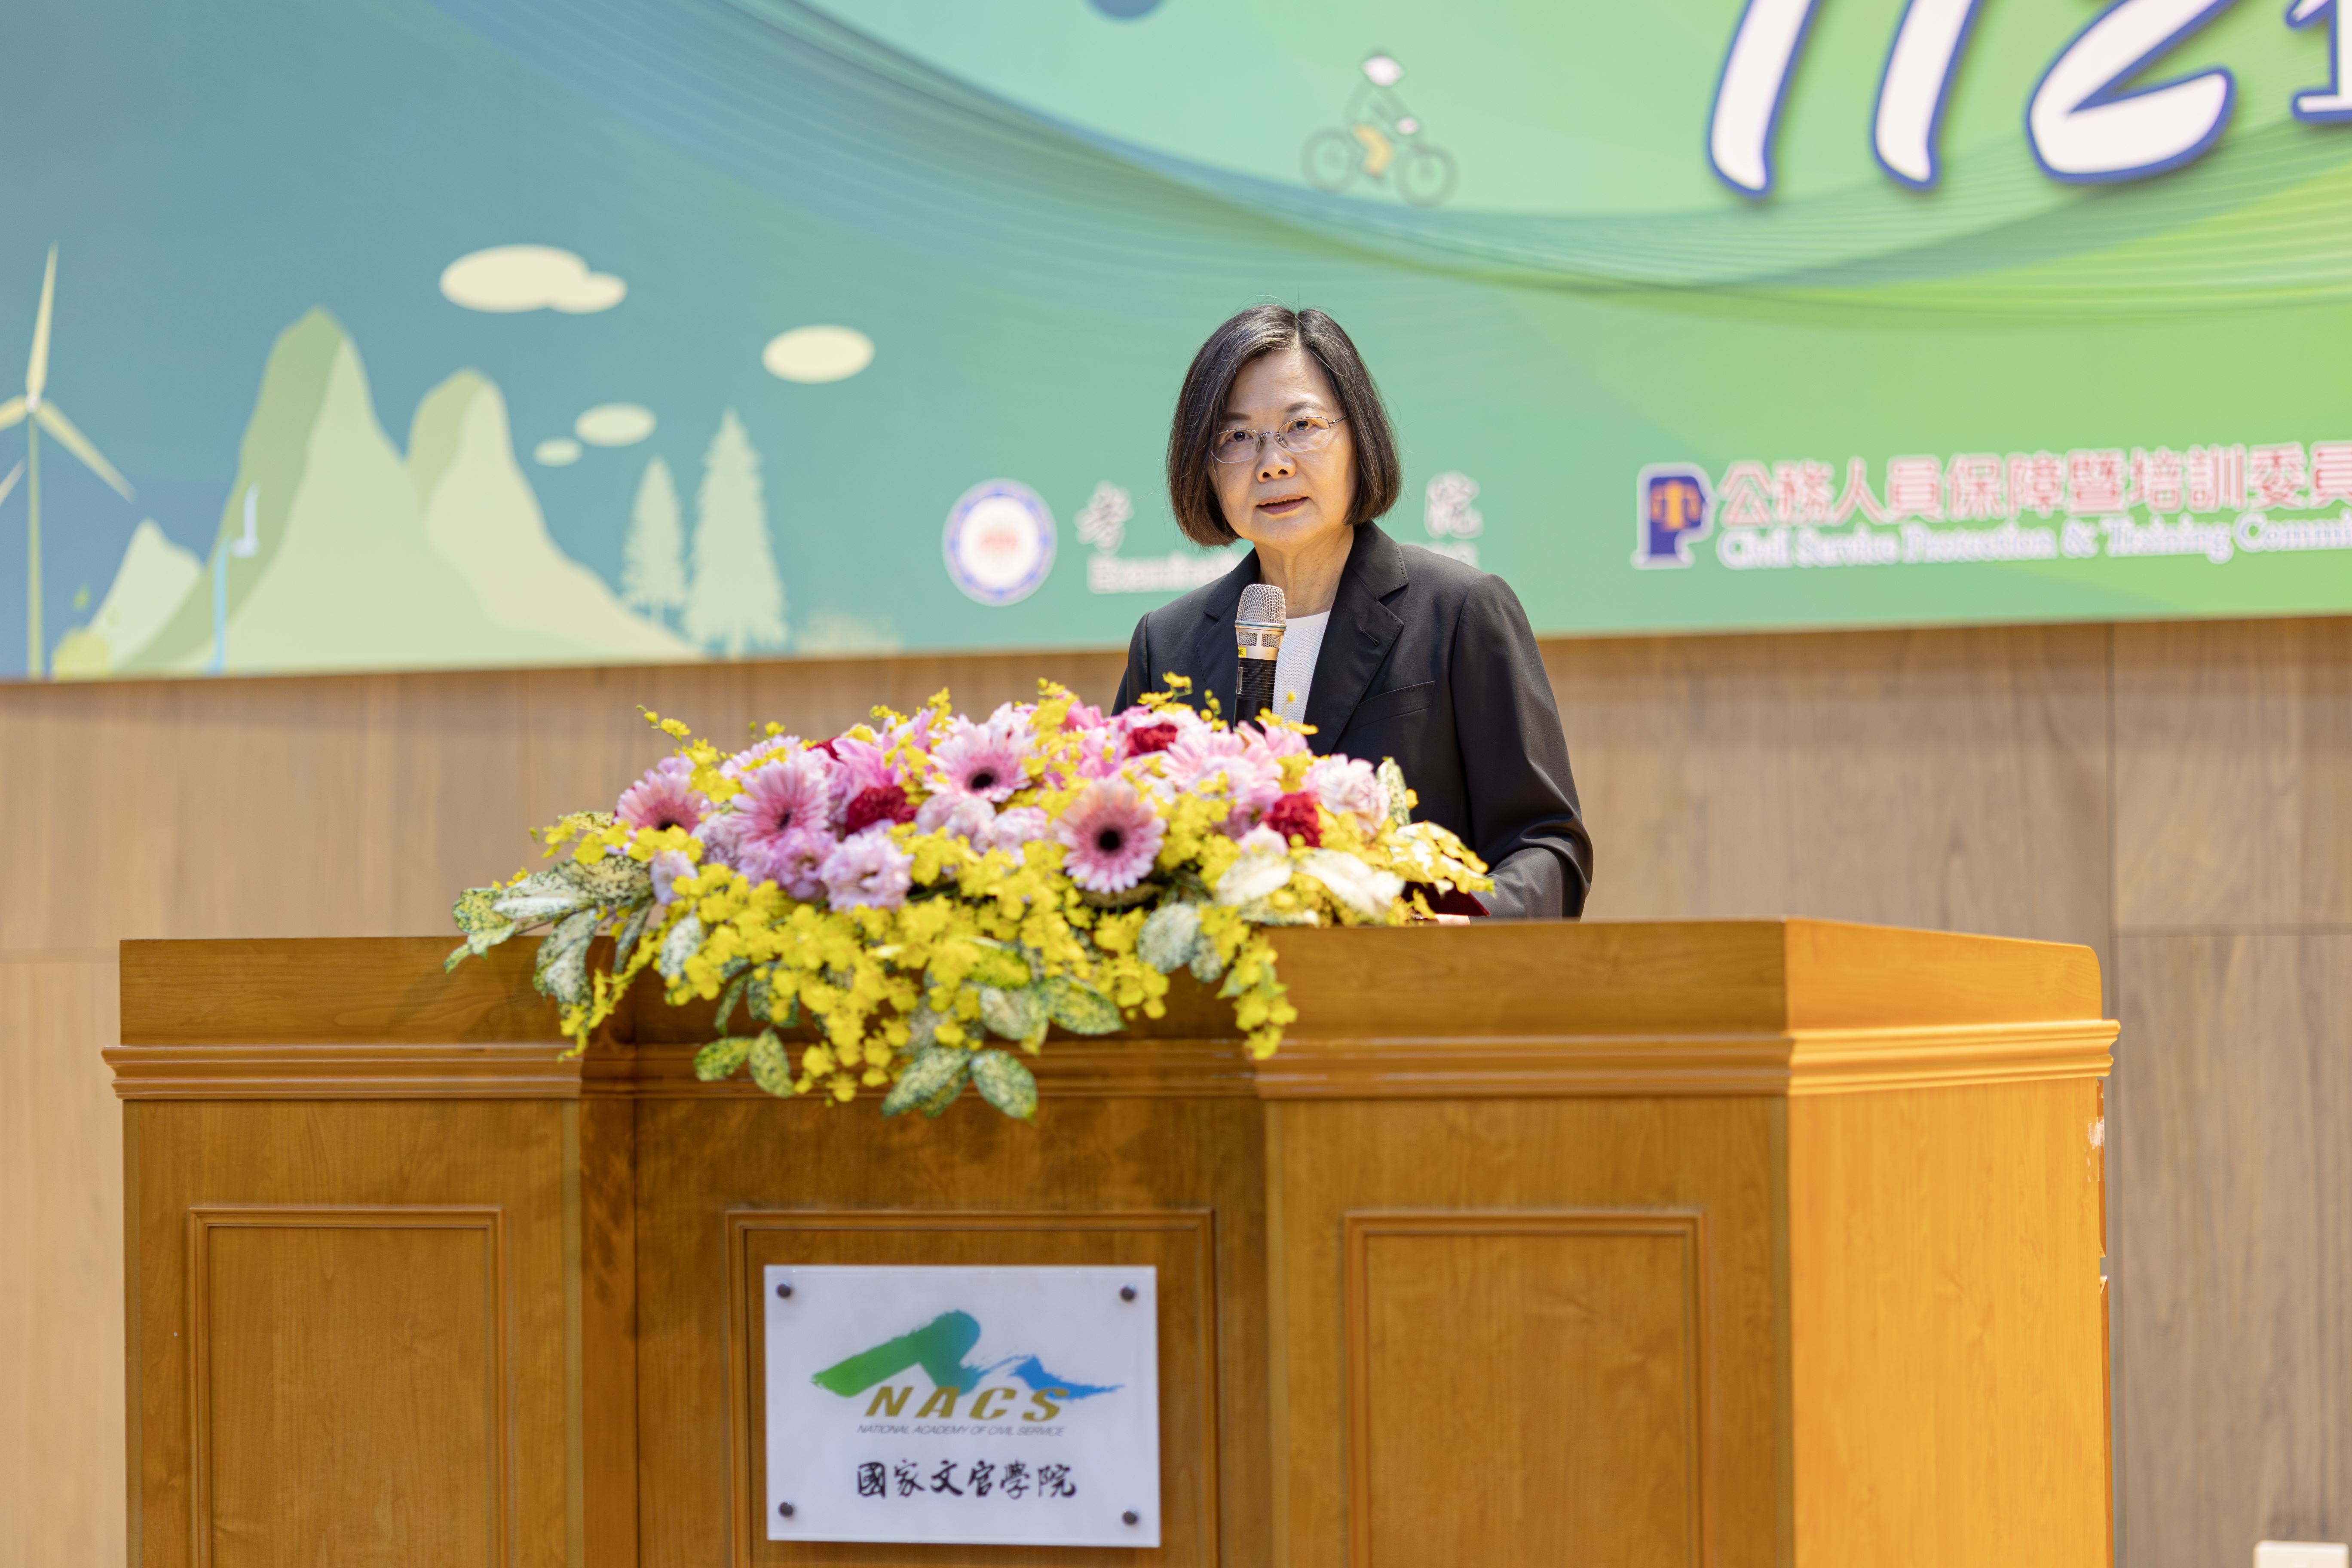 President Tsai Ing-wen delivers remarks at the opening ceremony of 2023 training program